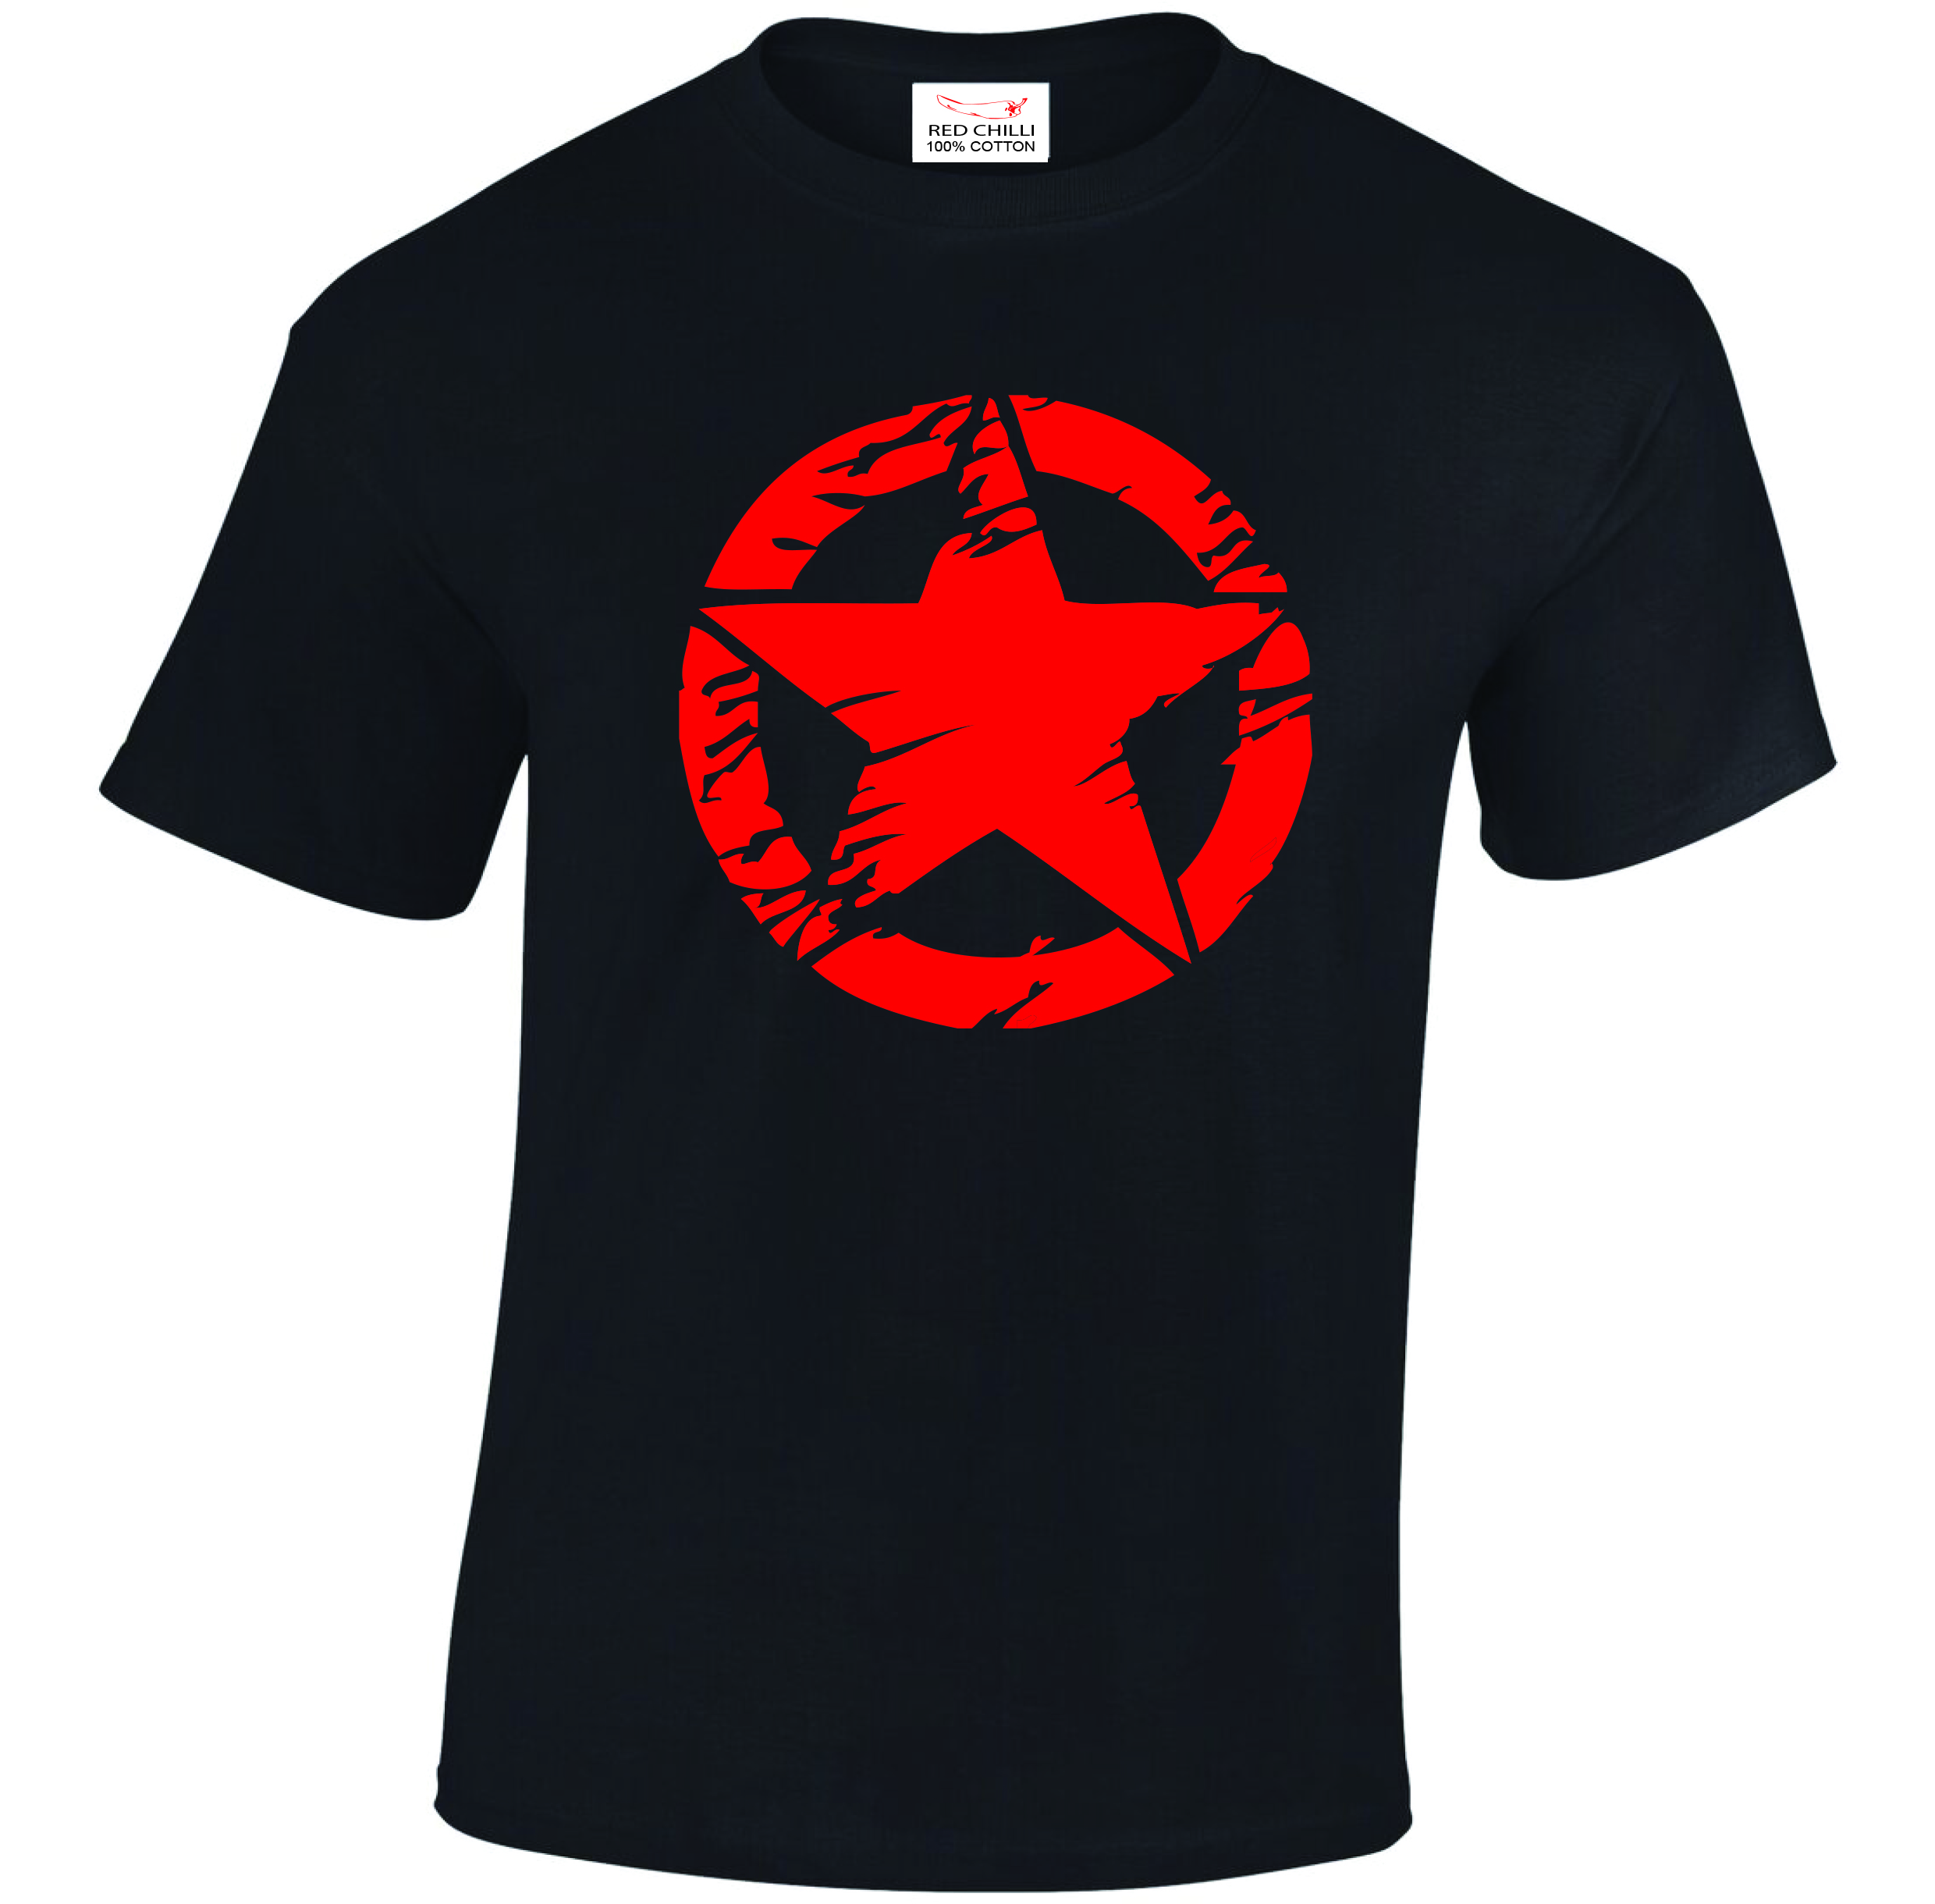 CAPTAIN STAR T-SHIRT | Red Chilli Apparel